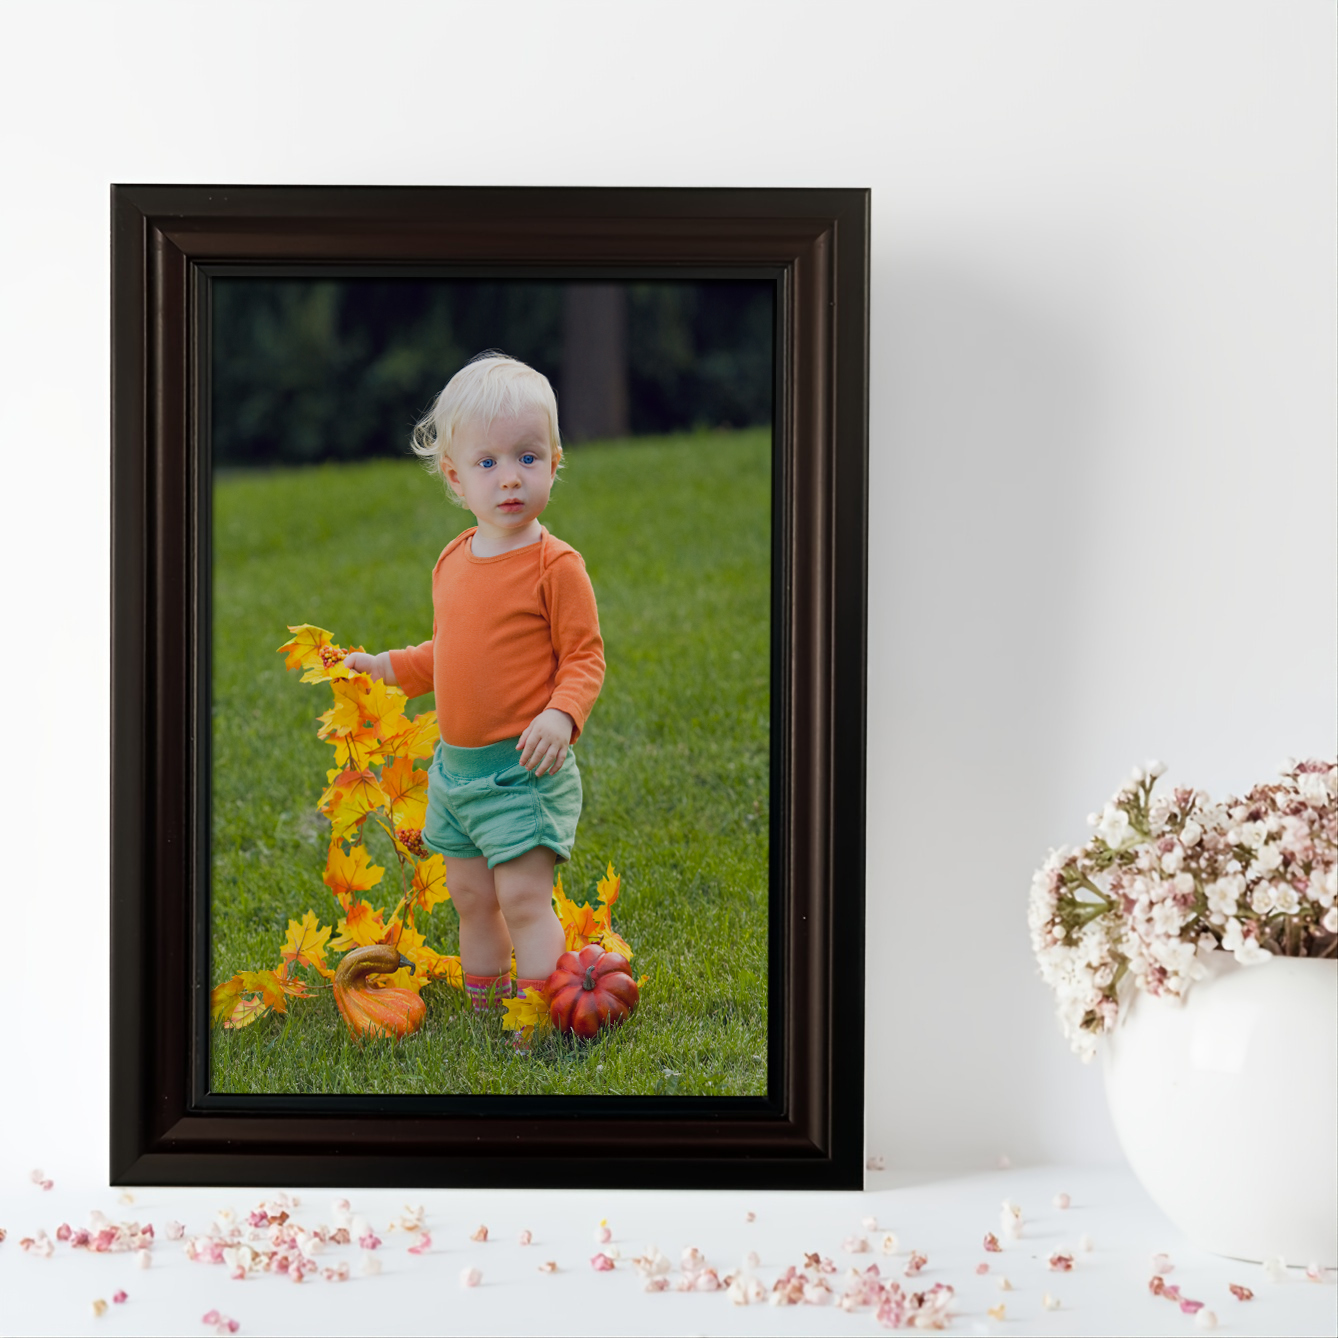 Buy Classic Wine Red Photo Frames for Family Party